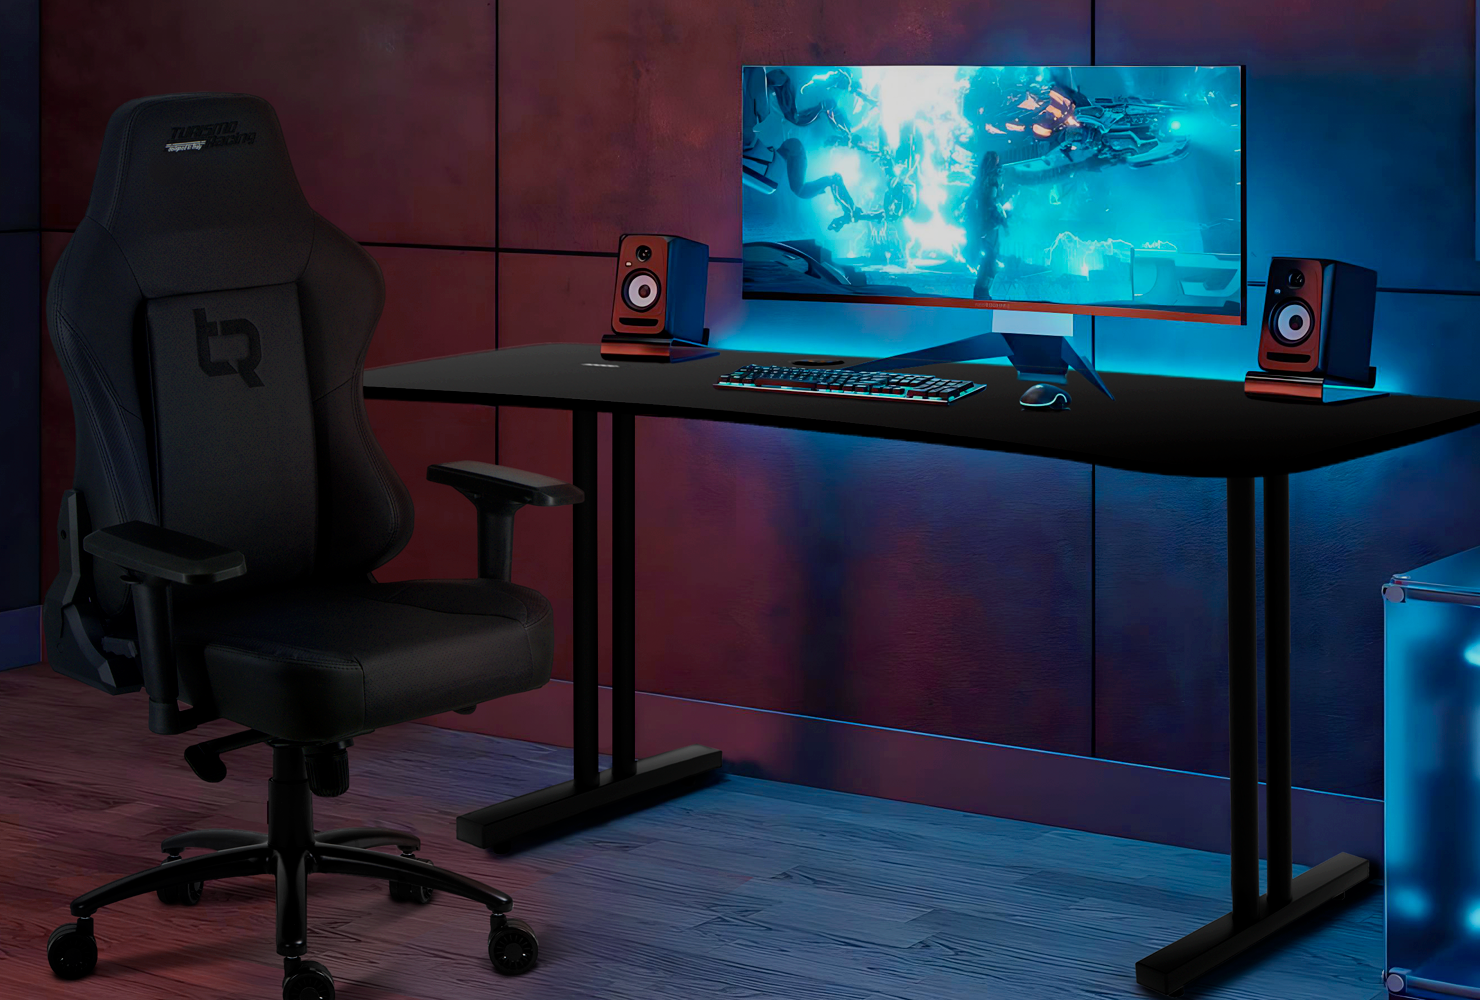 Infinity 2023 64 inch Gaming Desk - SALE!